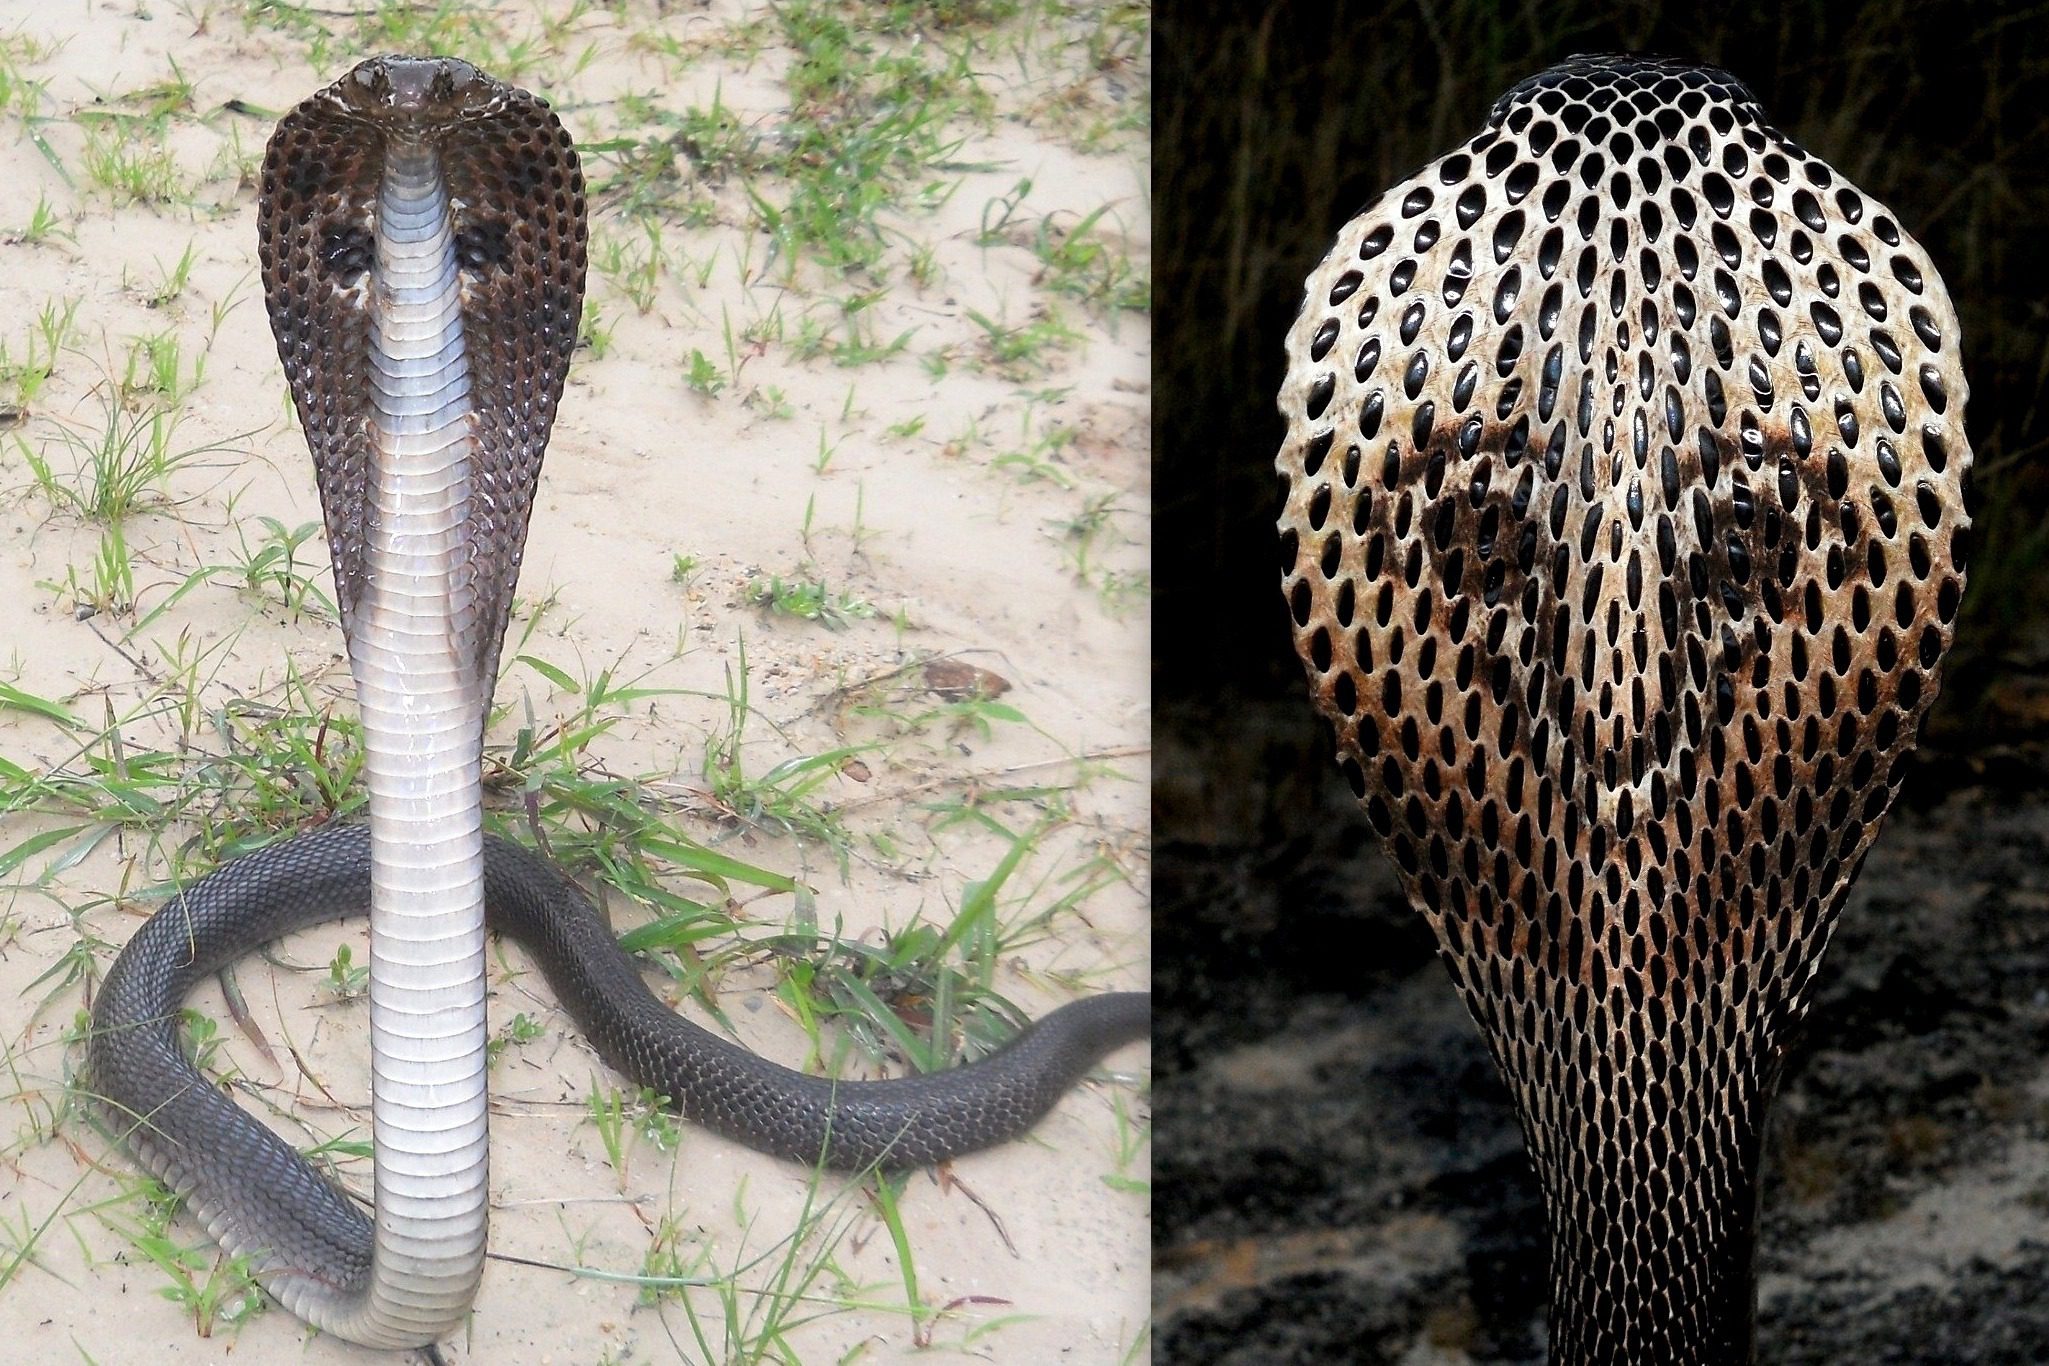 Myths About Snakes in India | Facts About Snakes